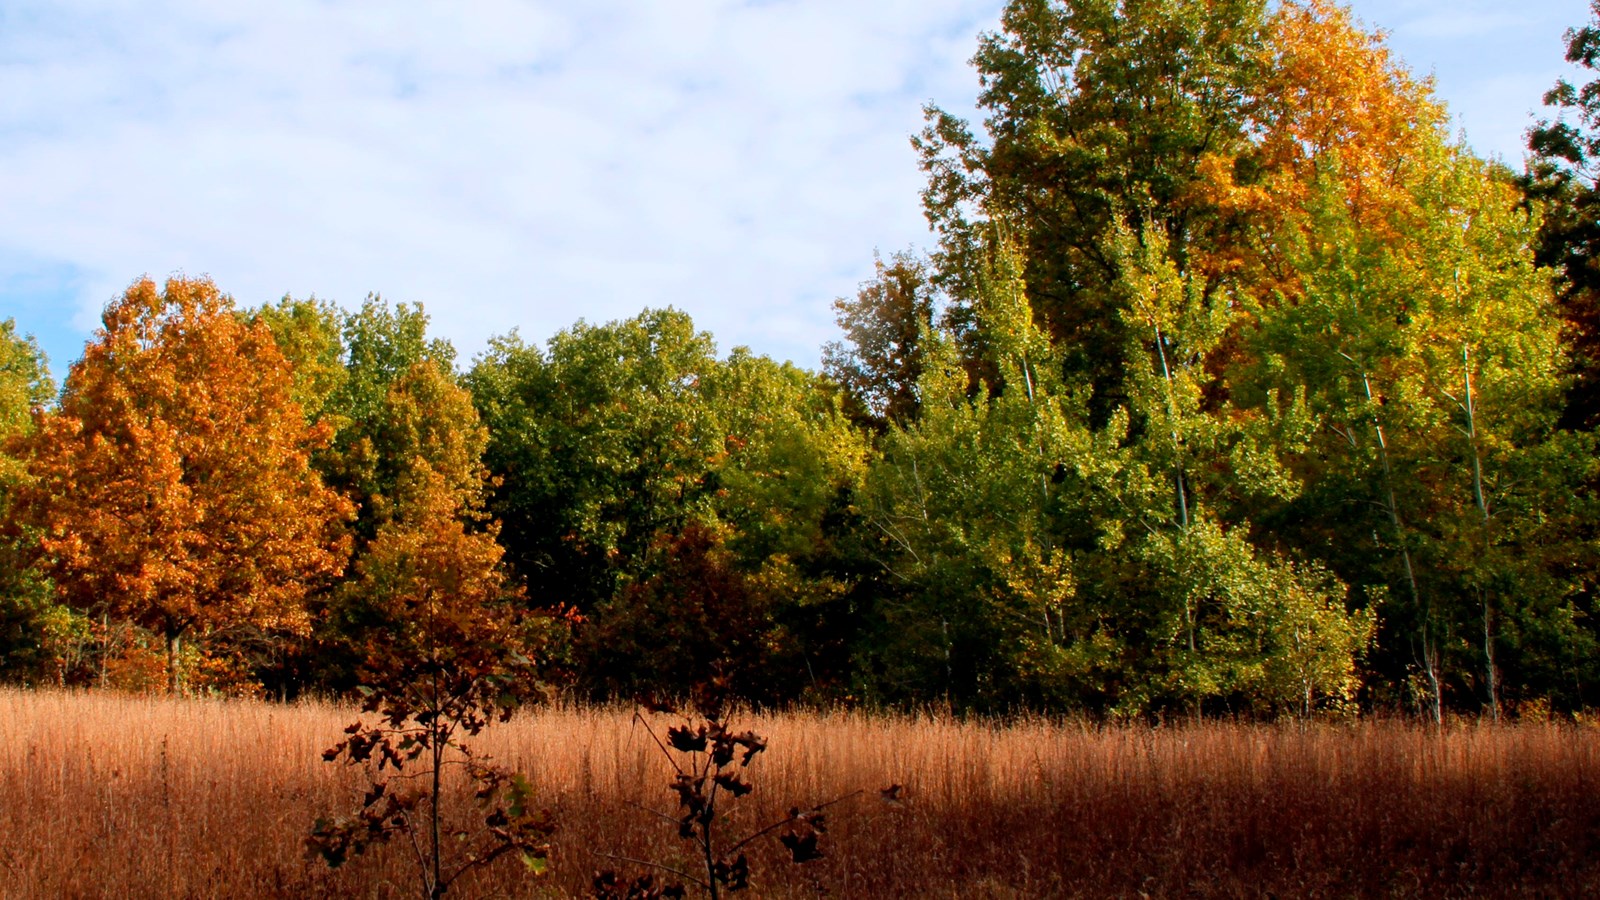 Golden grasses spread out across the field.  The leaves on the trees are green, gold, and red.